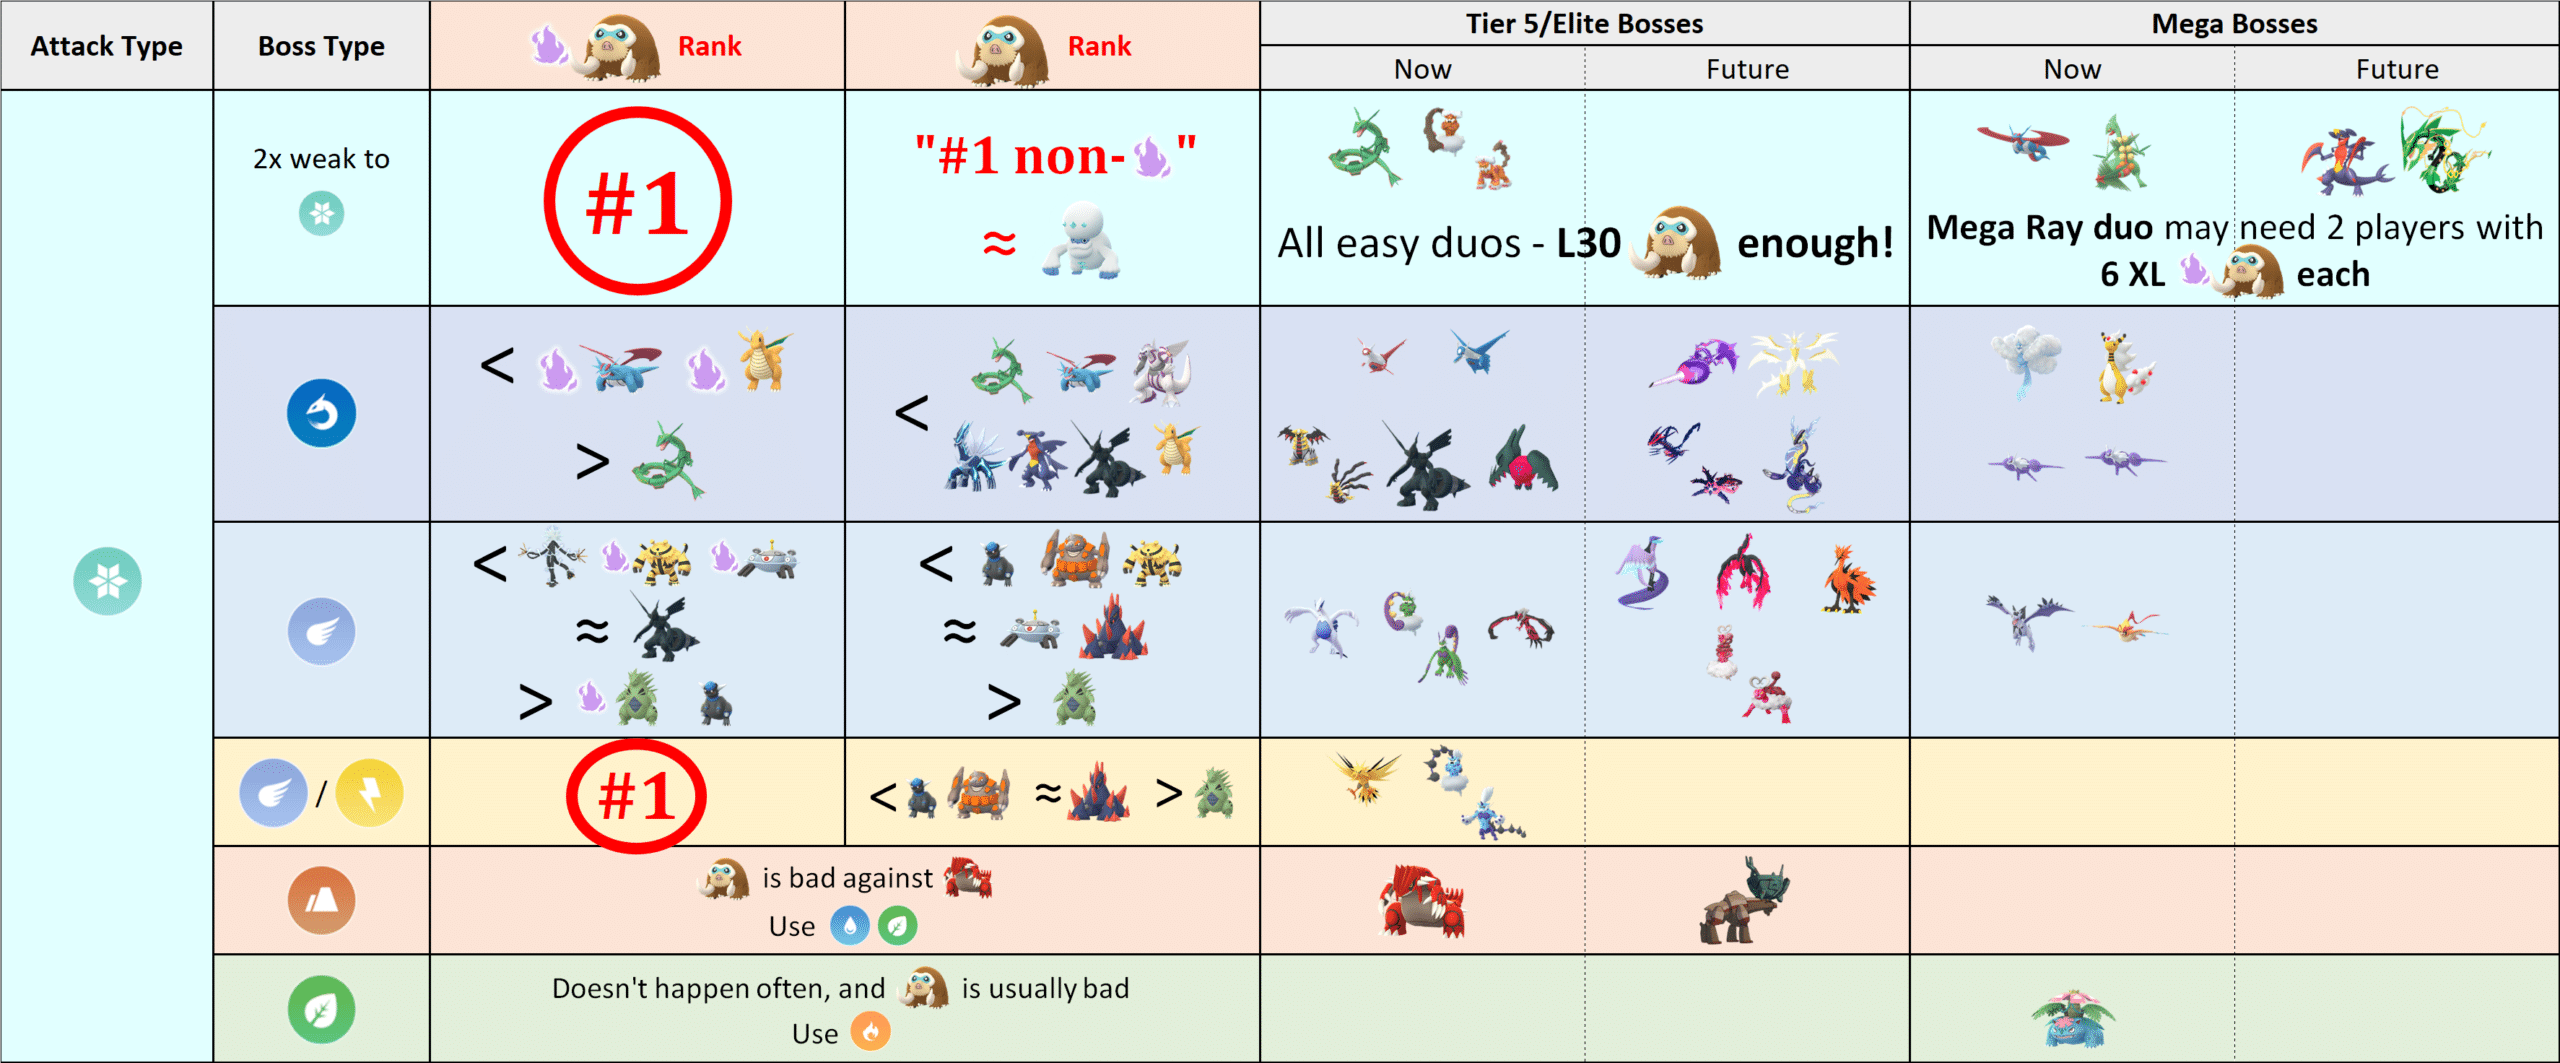 THE SHINY *RAIKOU* COUNTER GUIDE! 100 IVs, MOVESET & WEAKNESS - ELECTRIC  RAID BOSS